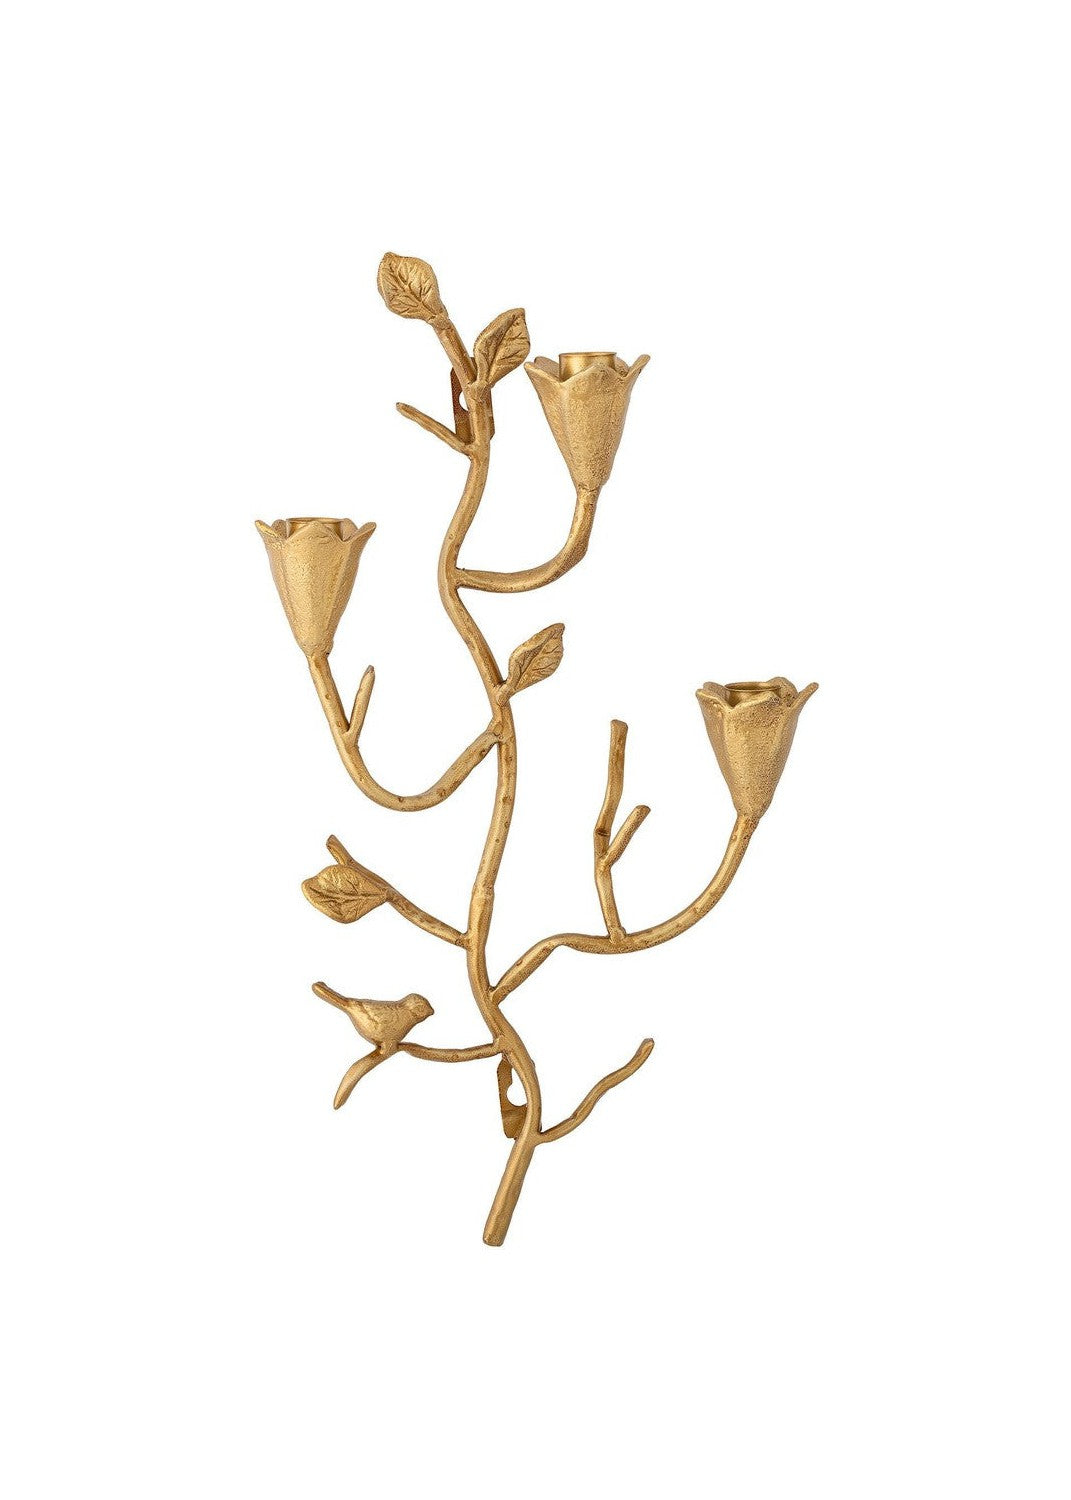 Creative Collection Trianon Wall Candle Holder, Gold, Metal